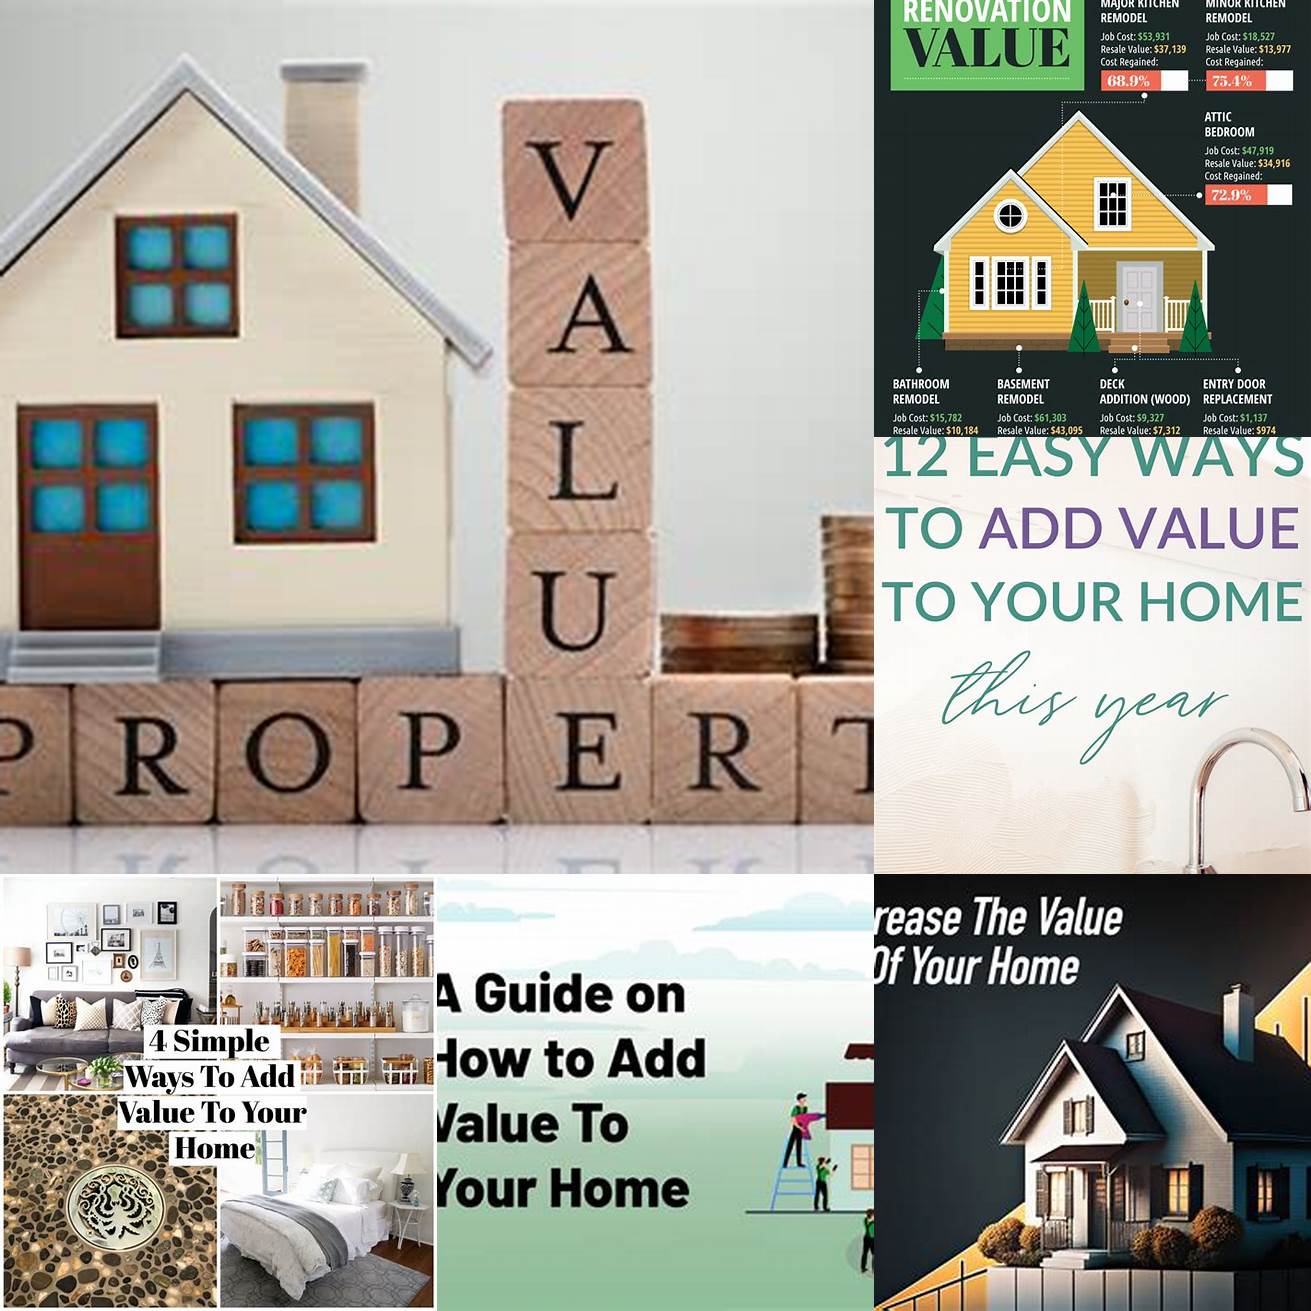 3 Adds value to your home